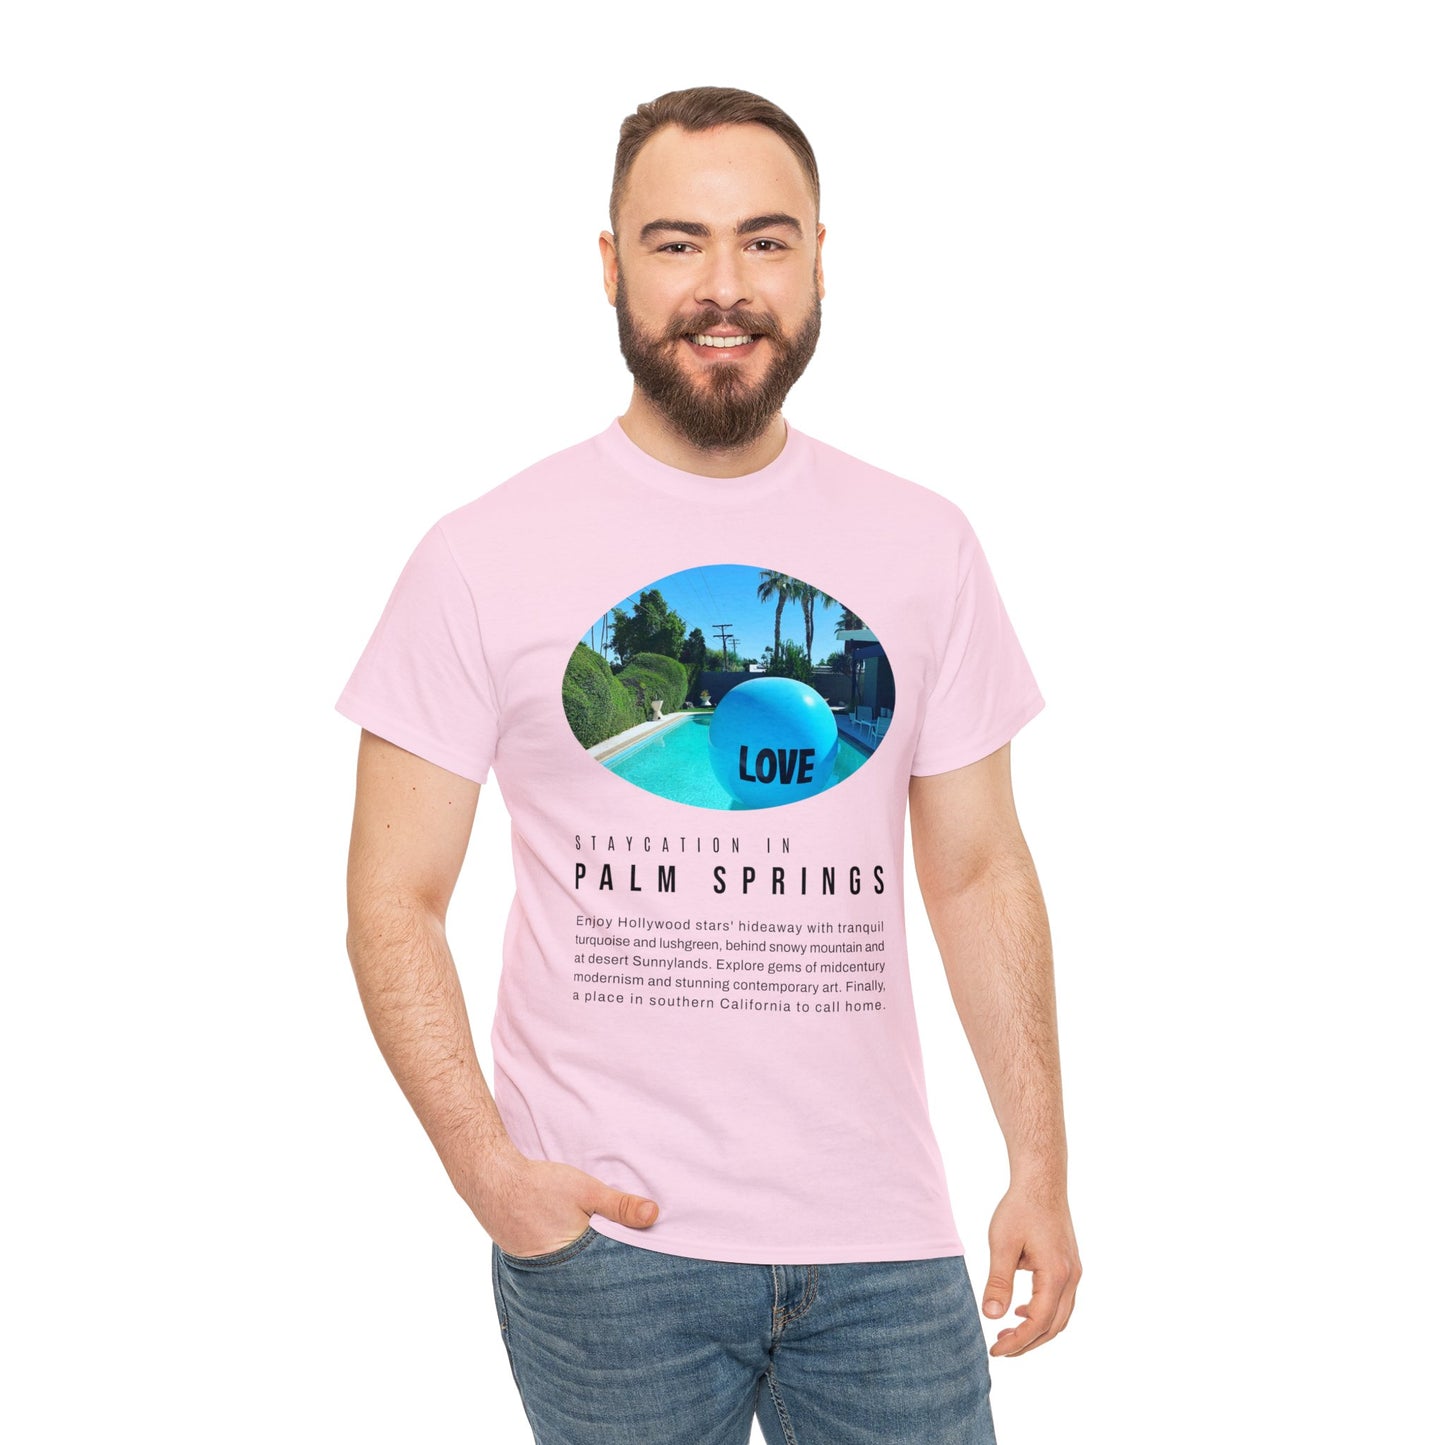 Staycation in Palm Springs Premium Unisex  Lifestyle Tee by ViralDestinations